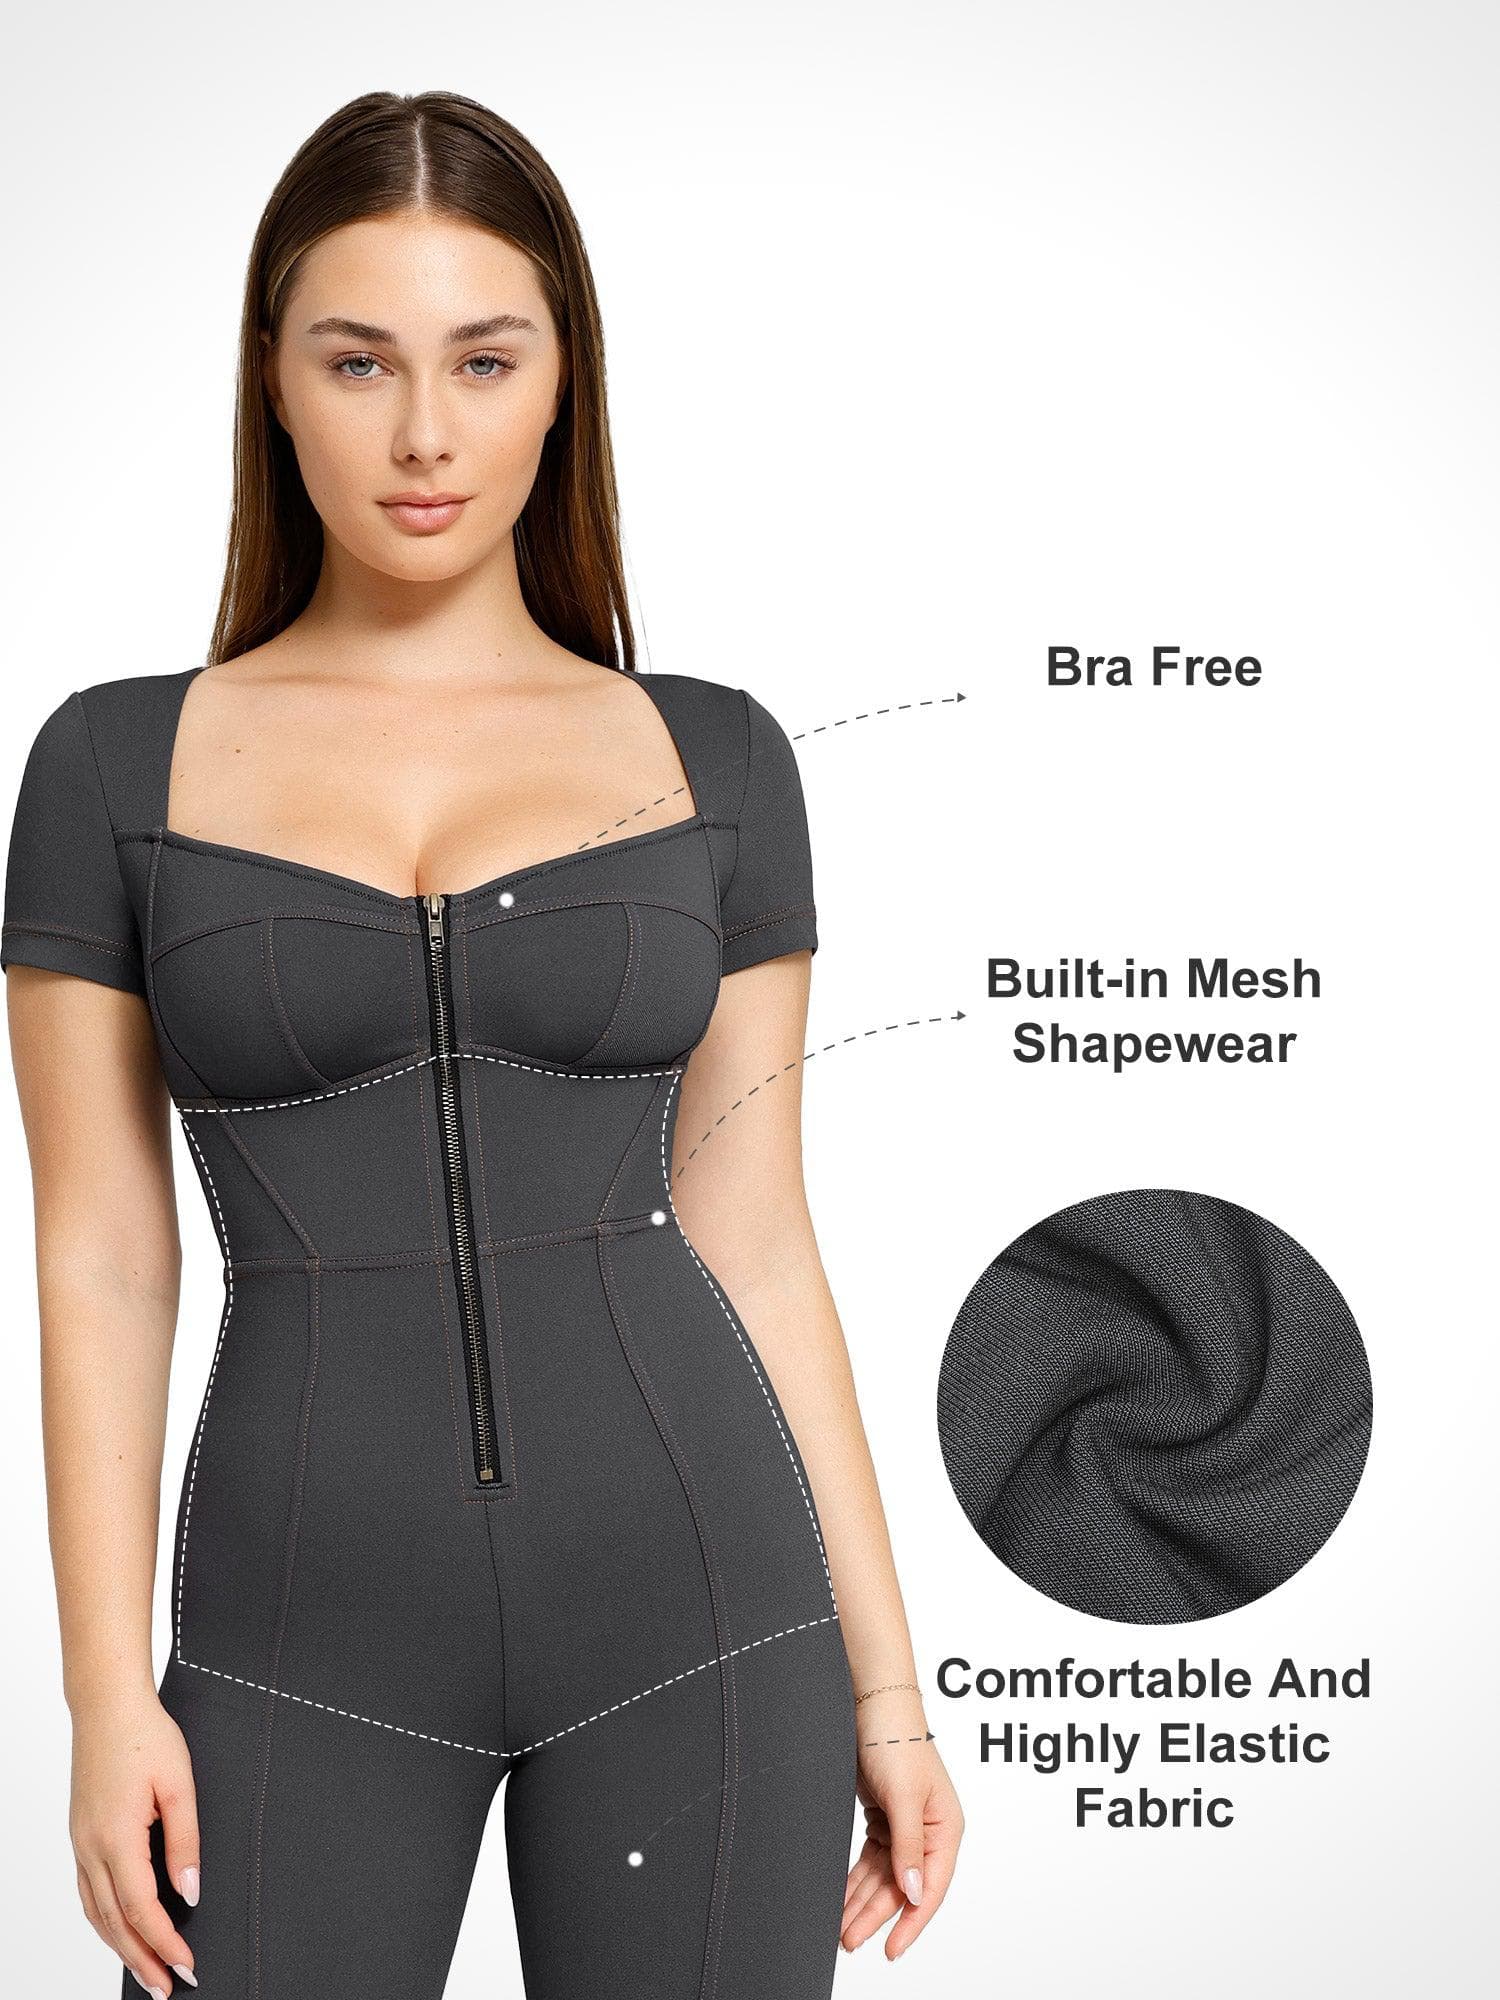 How to Choose the Right Popilush Jumpsuit for Your Body Type